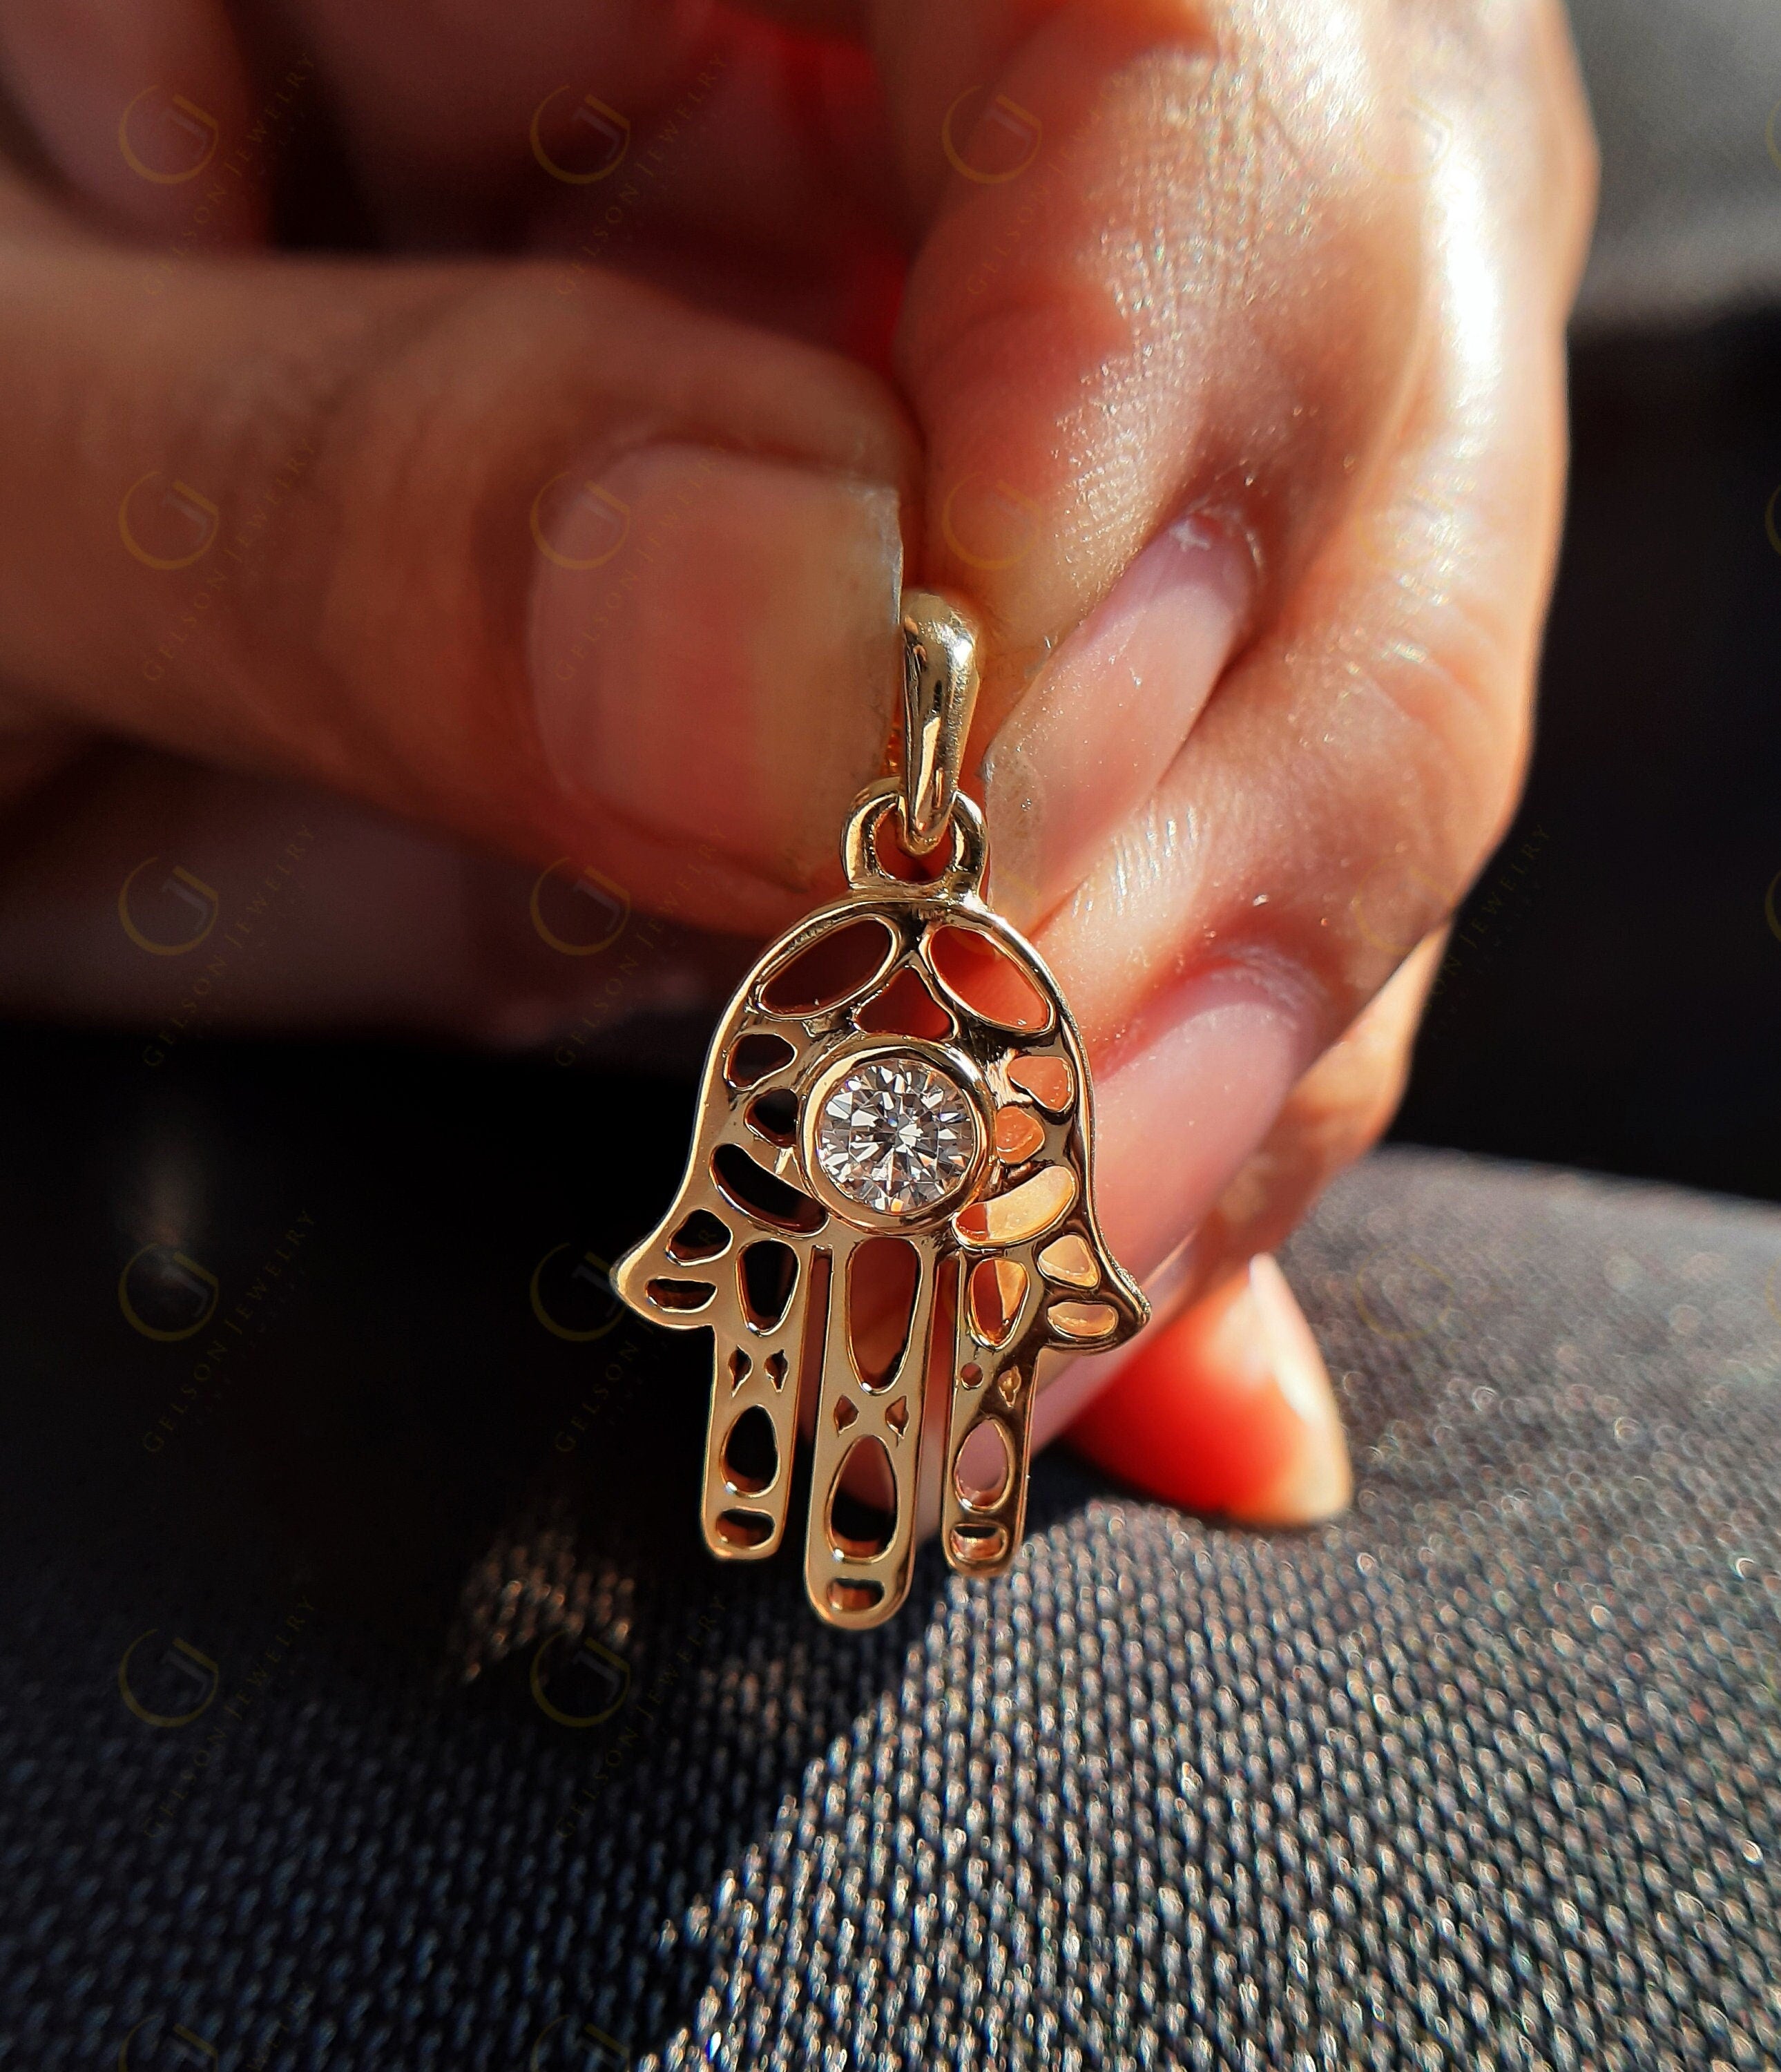 Golden Hamsa Hand Pendant - Symbolic Protection Necklace with Evil Eye Warding - Silver and Solid Gold - Spiritual Jewelry